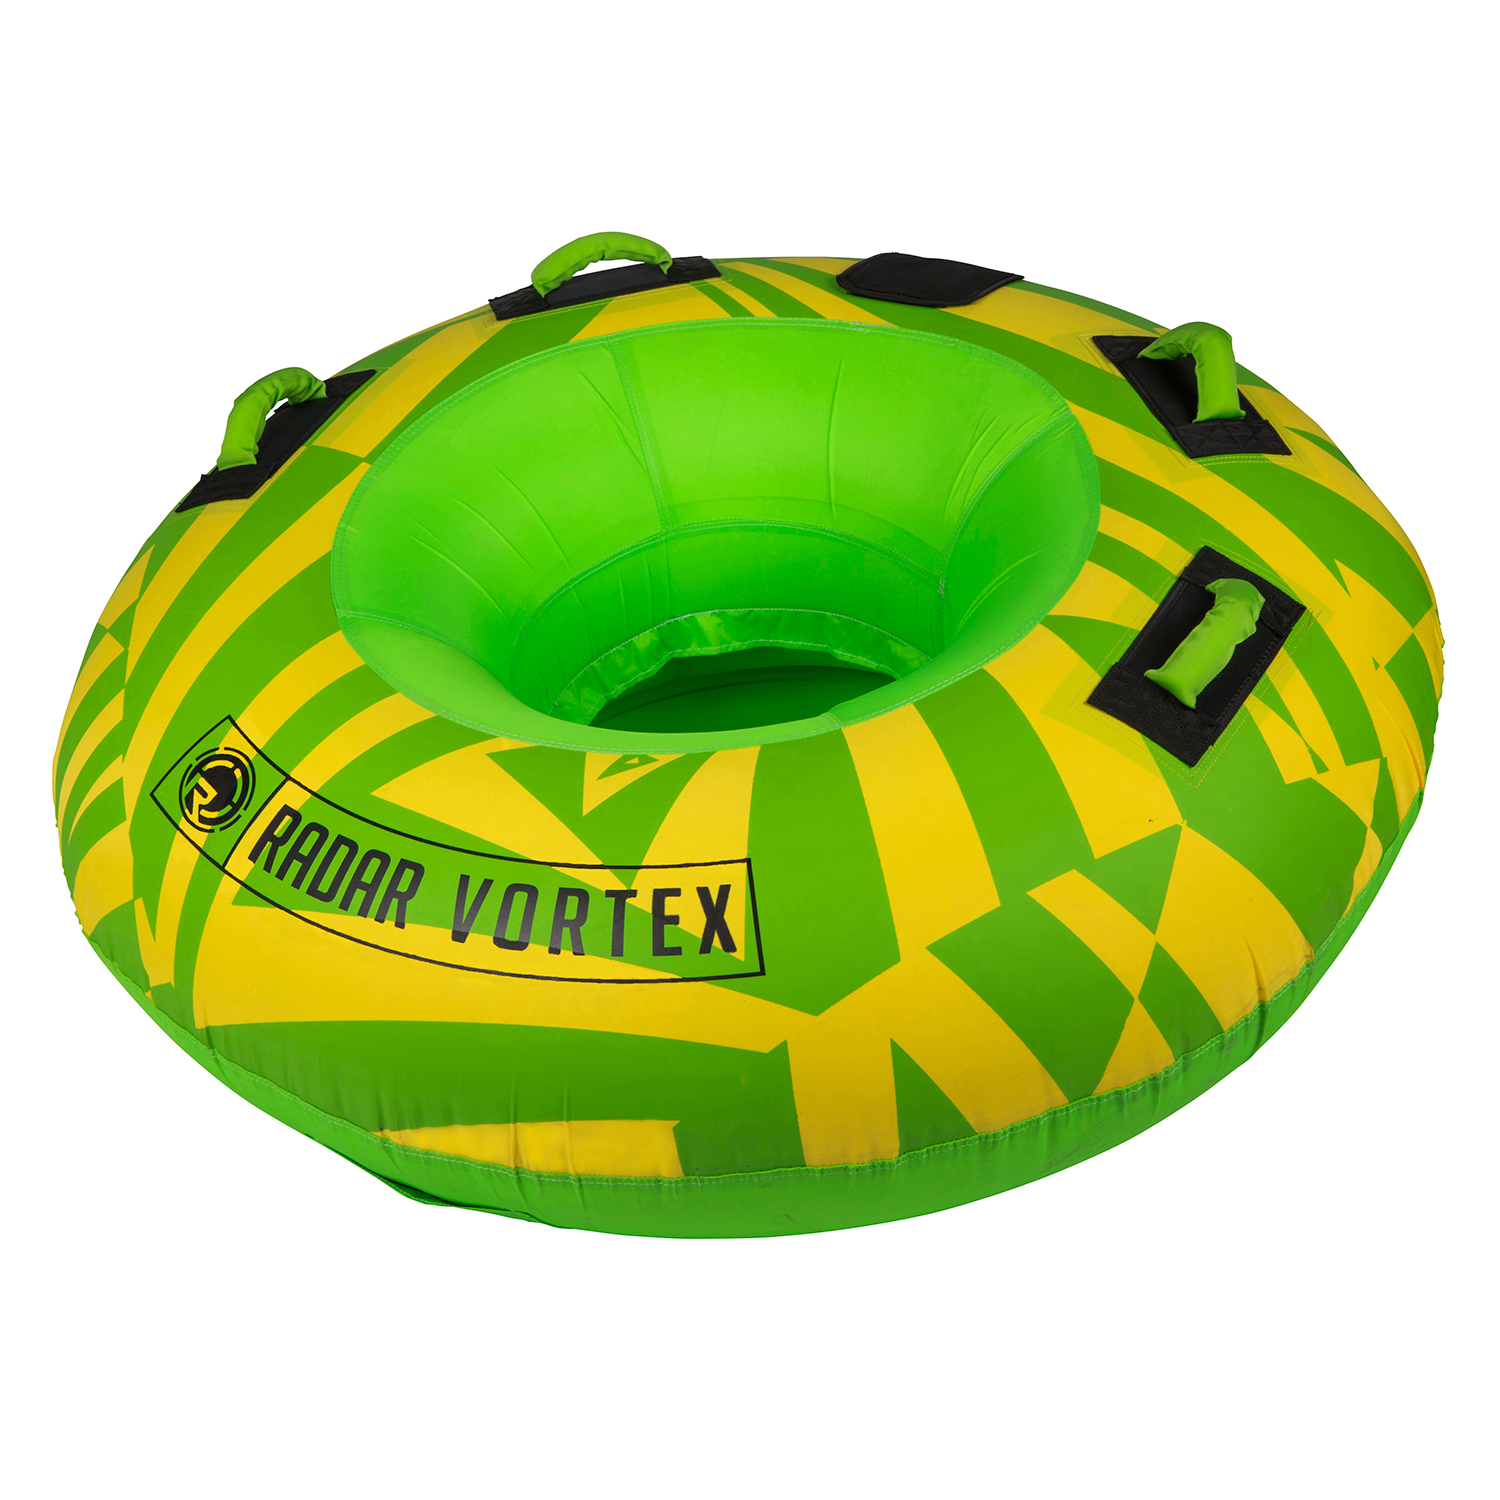 2020 Radar Vortex 1 Person Towable Tube with Rope - Yellow/Green ...